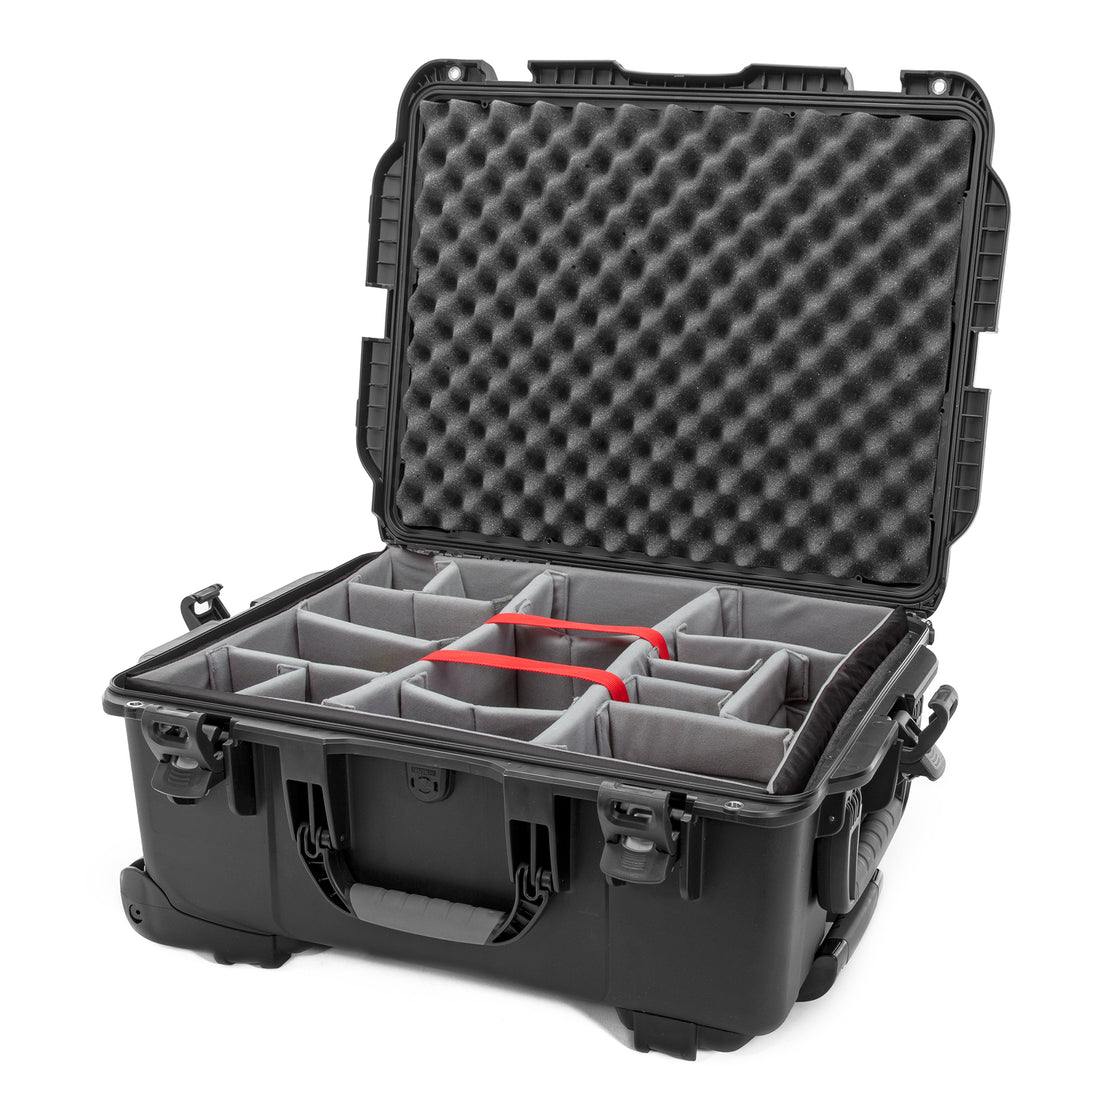 Nanuk 955-2001 Waterproof Hard Case with Wheels and Padded Divider - Black